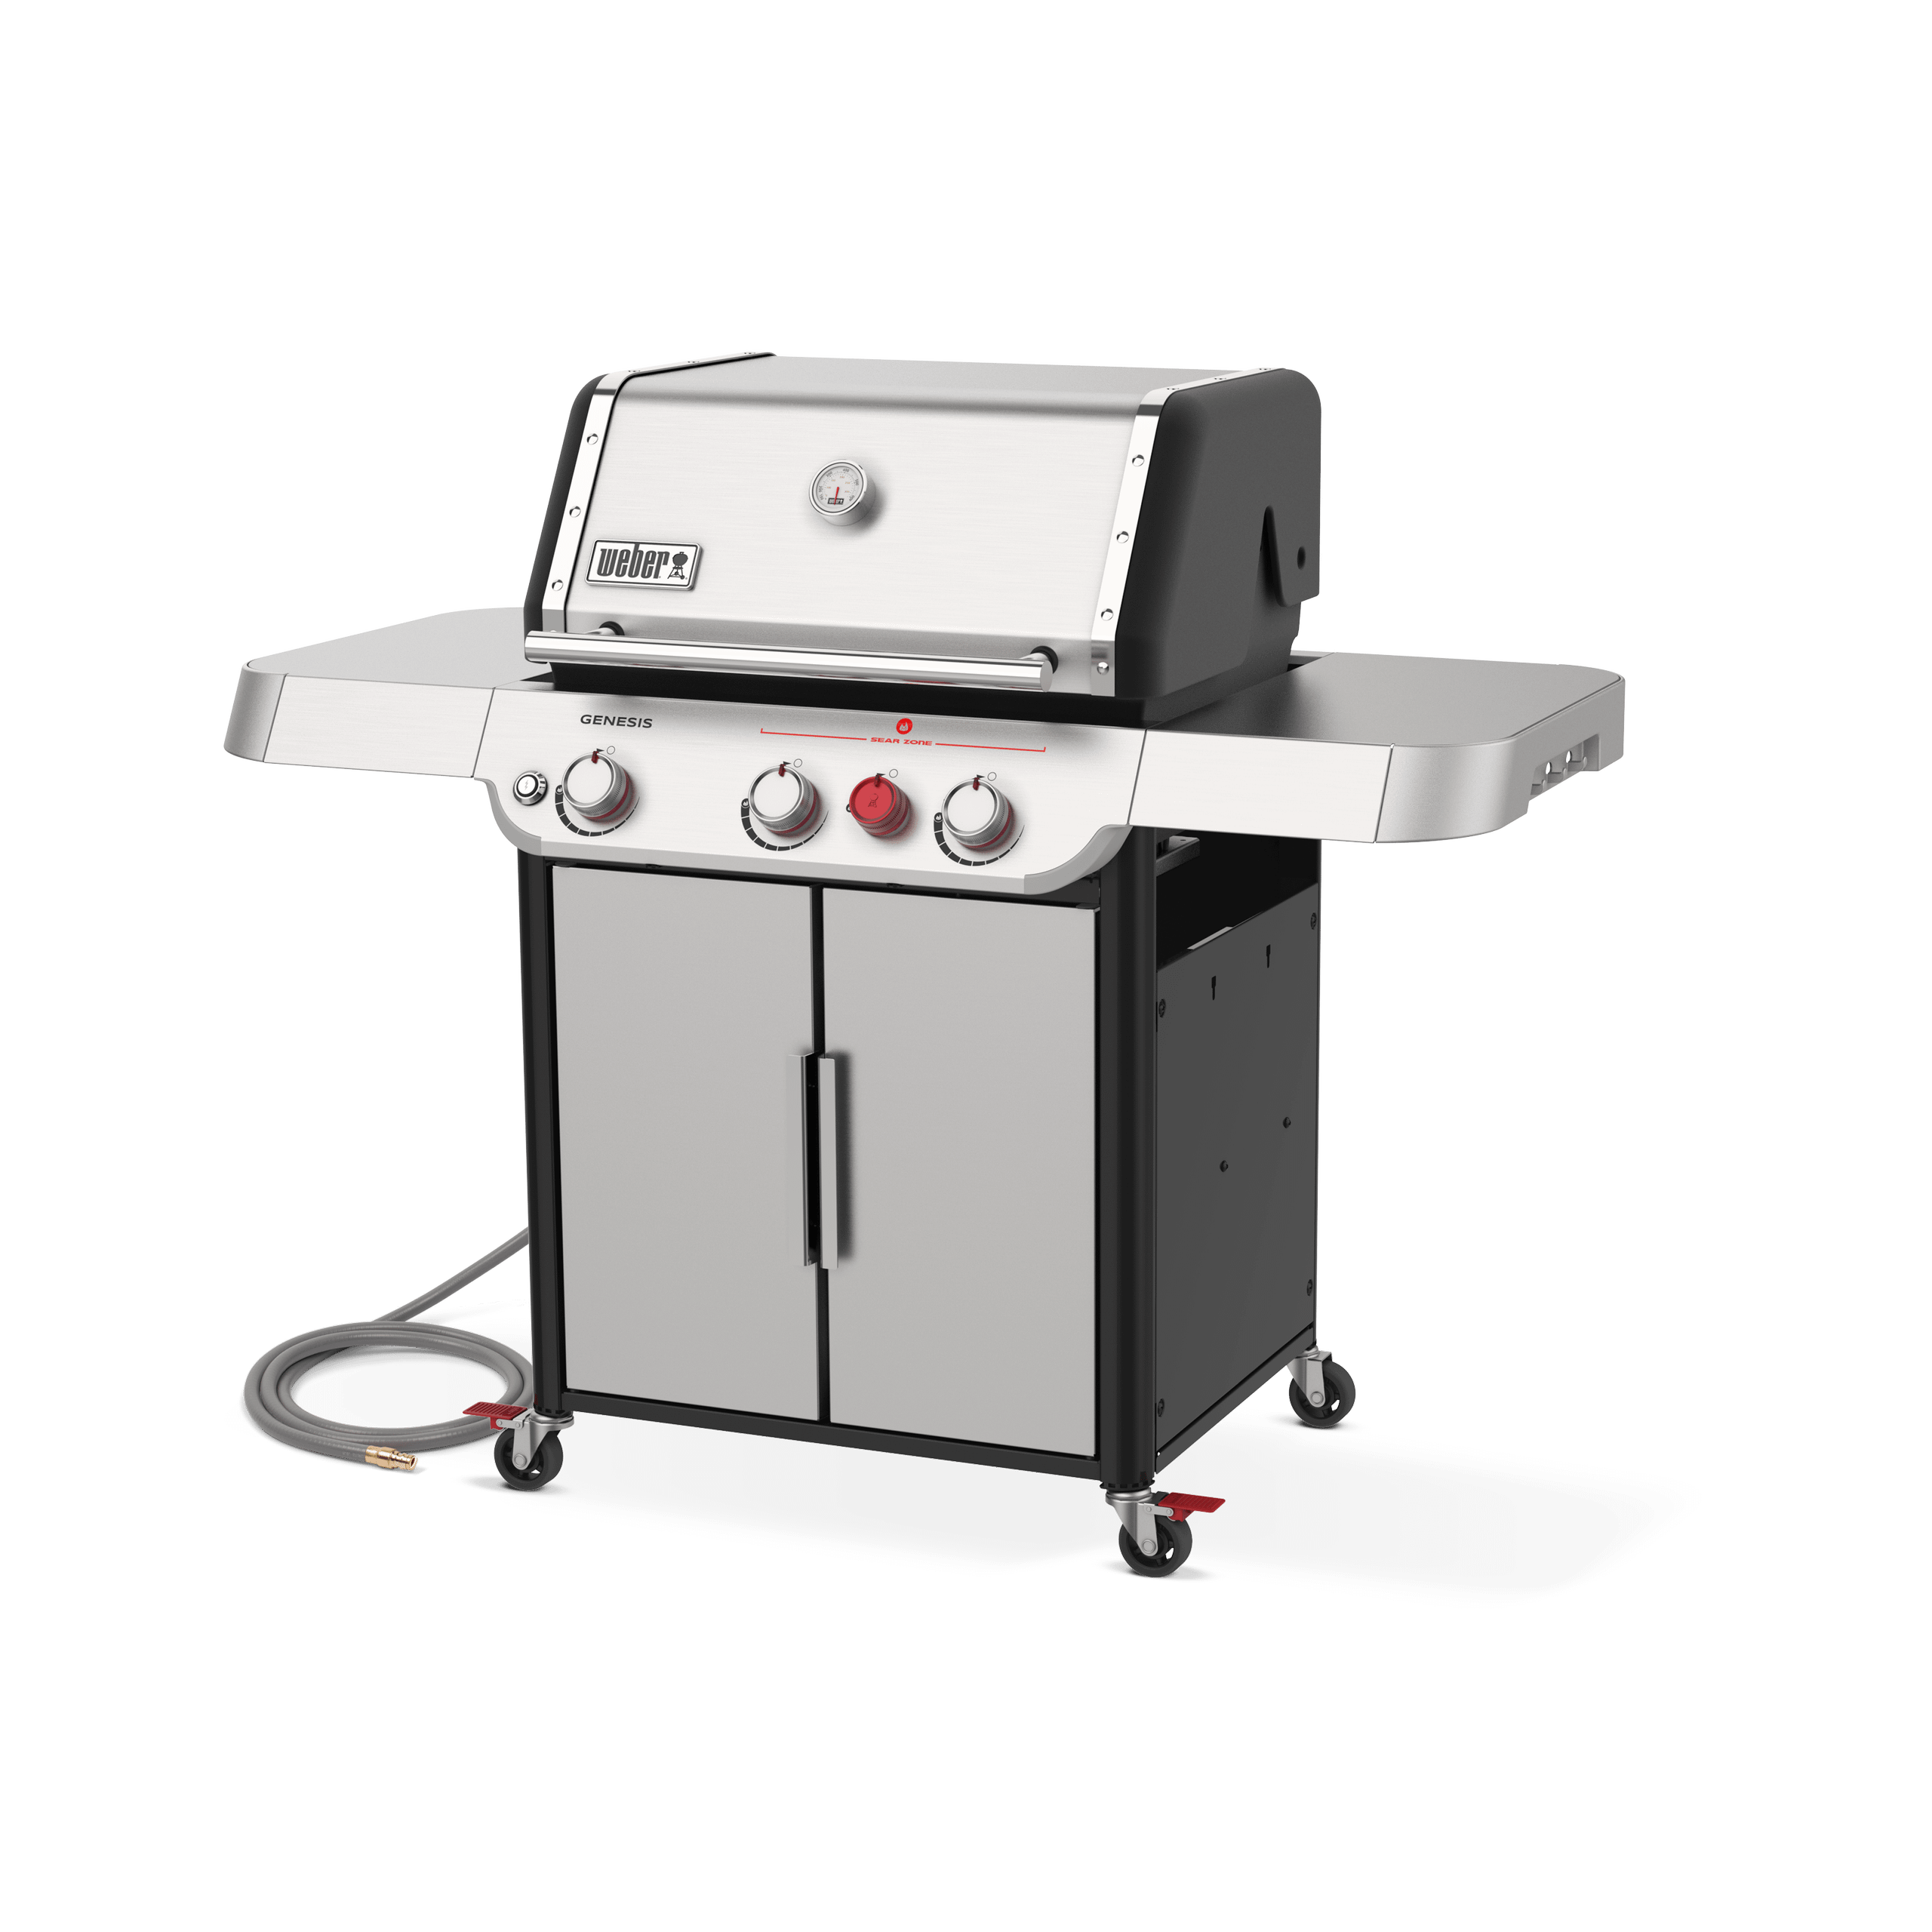 Weber Genesis SP-S-325 Gas Grill (Natural Gas) - Stainless Steel